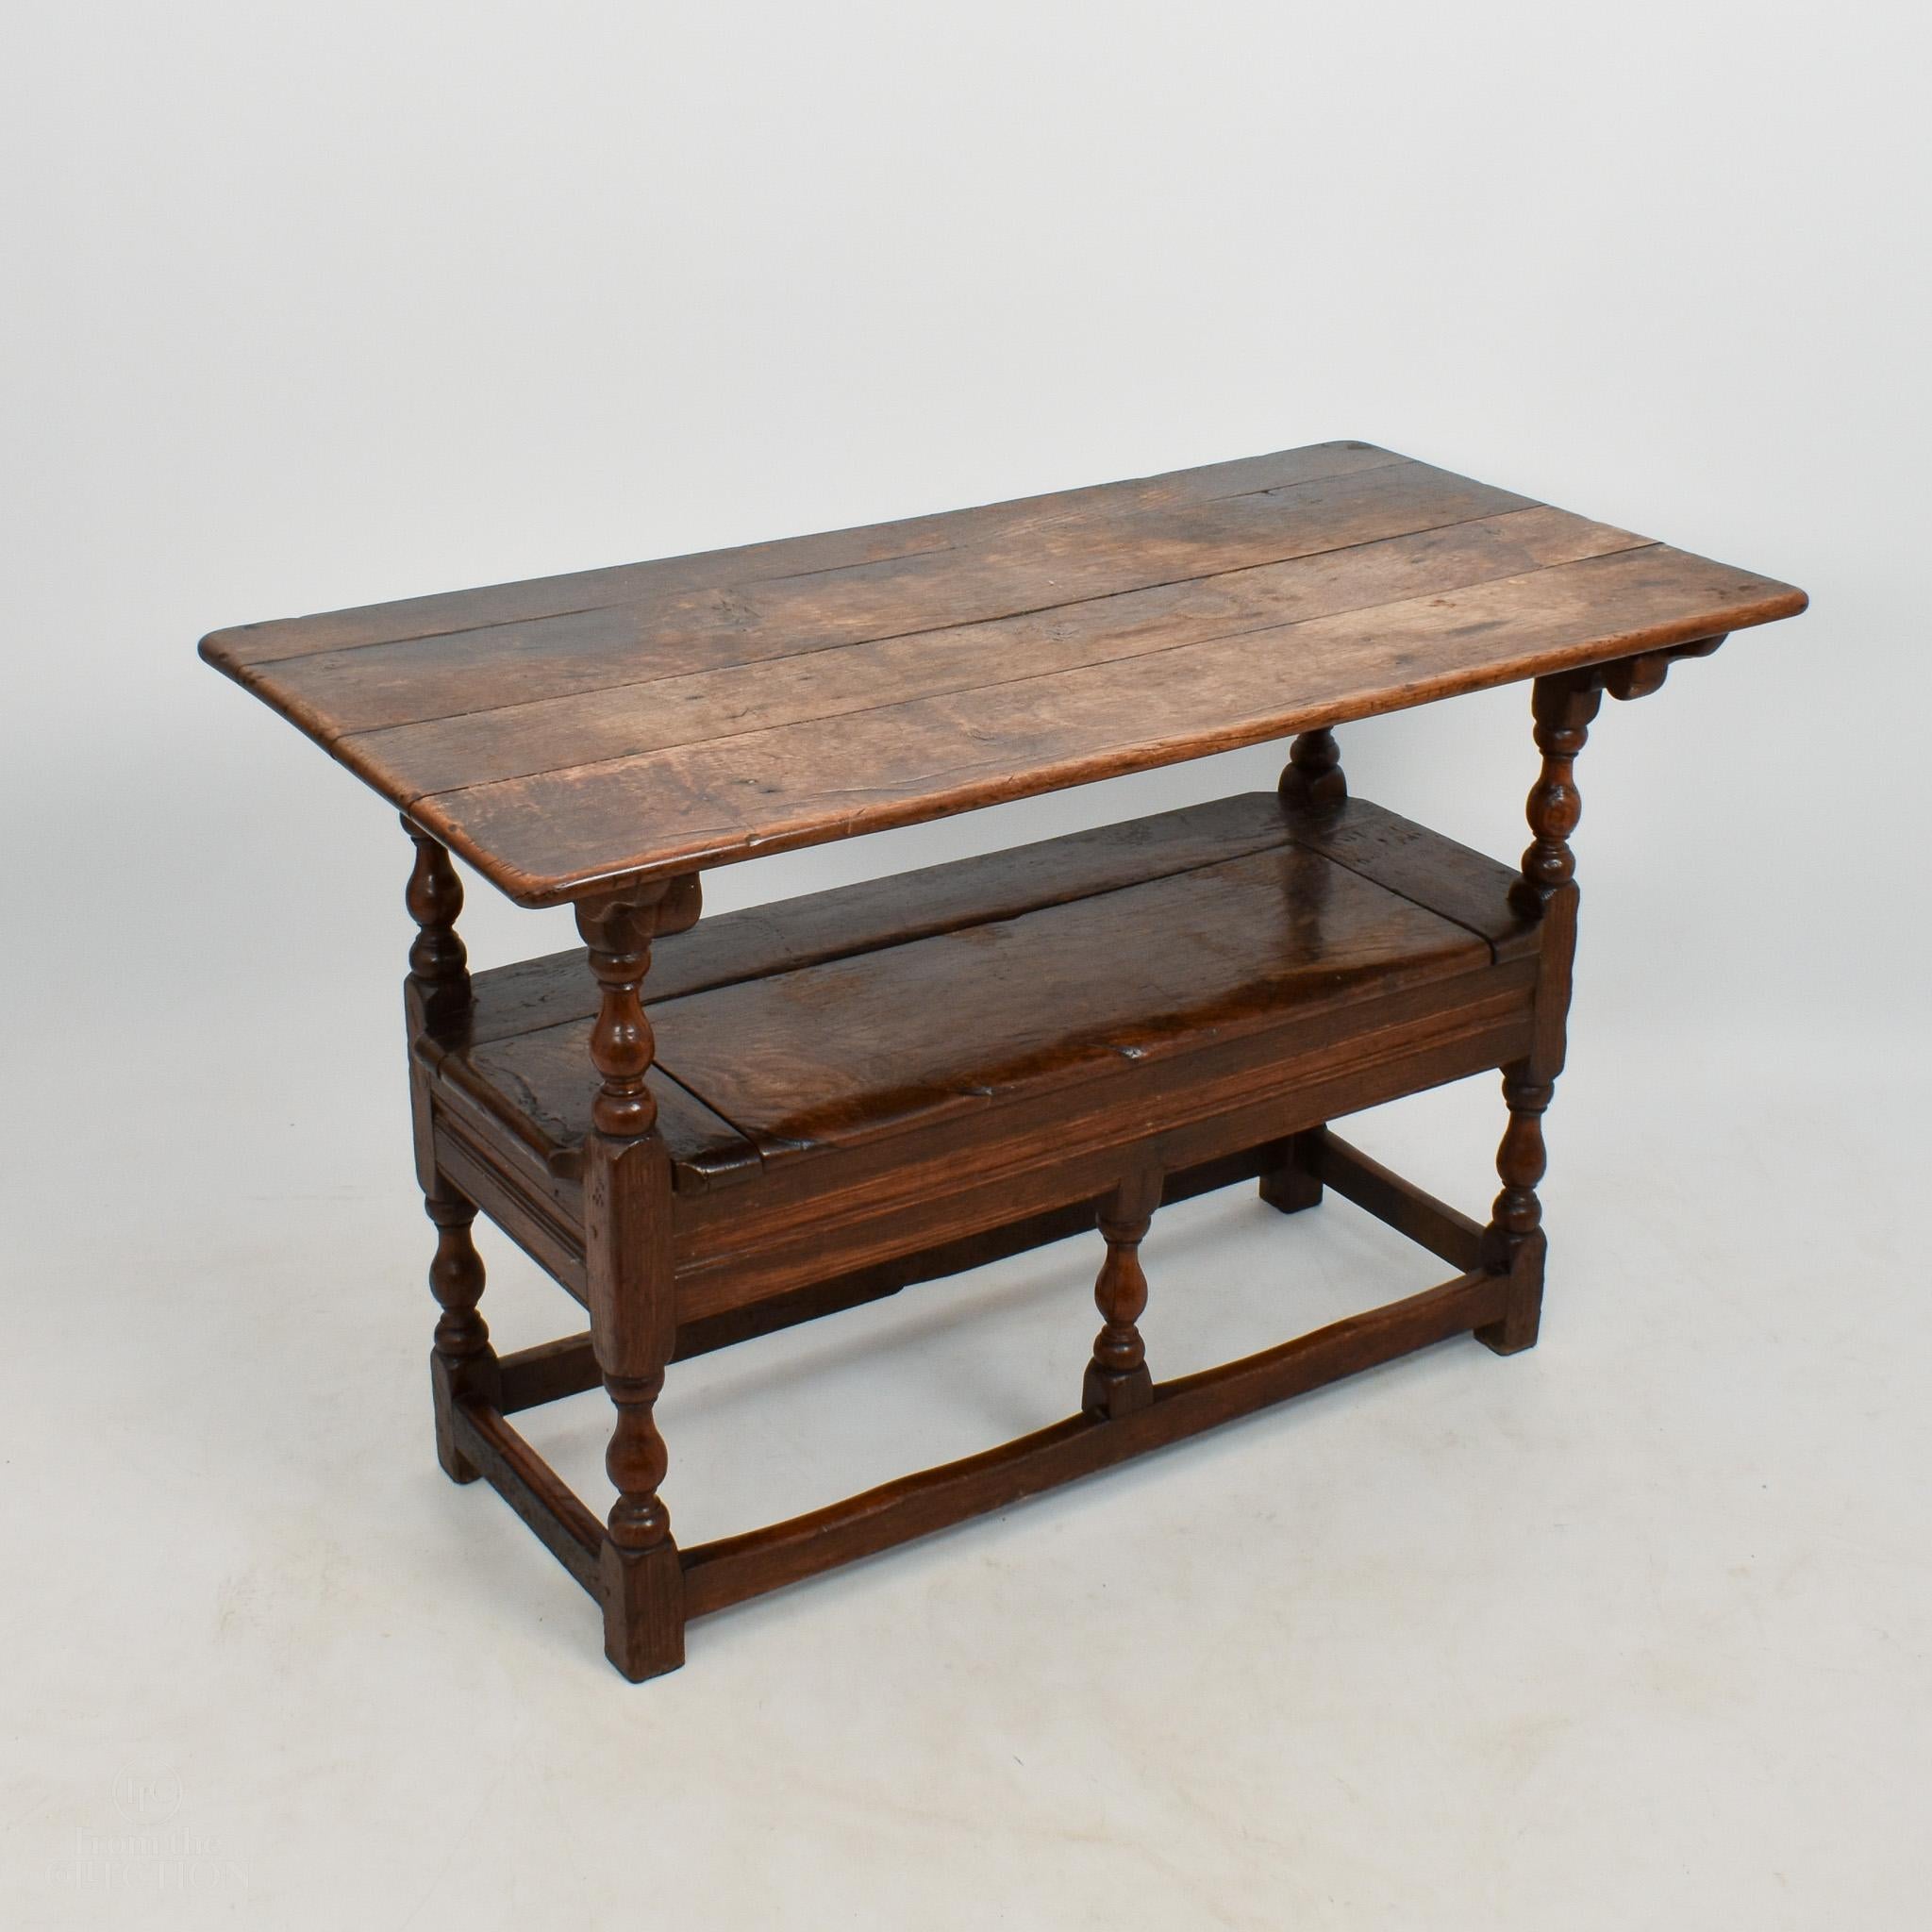 Oak circa 1760 Monk's bench that becomes a table. In original condition with beautiful colour. The seat lifts up for storage. With six turned legs and front and back joining railings. There are markings on the surface and bench that add a richness